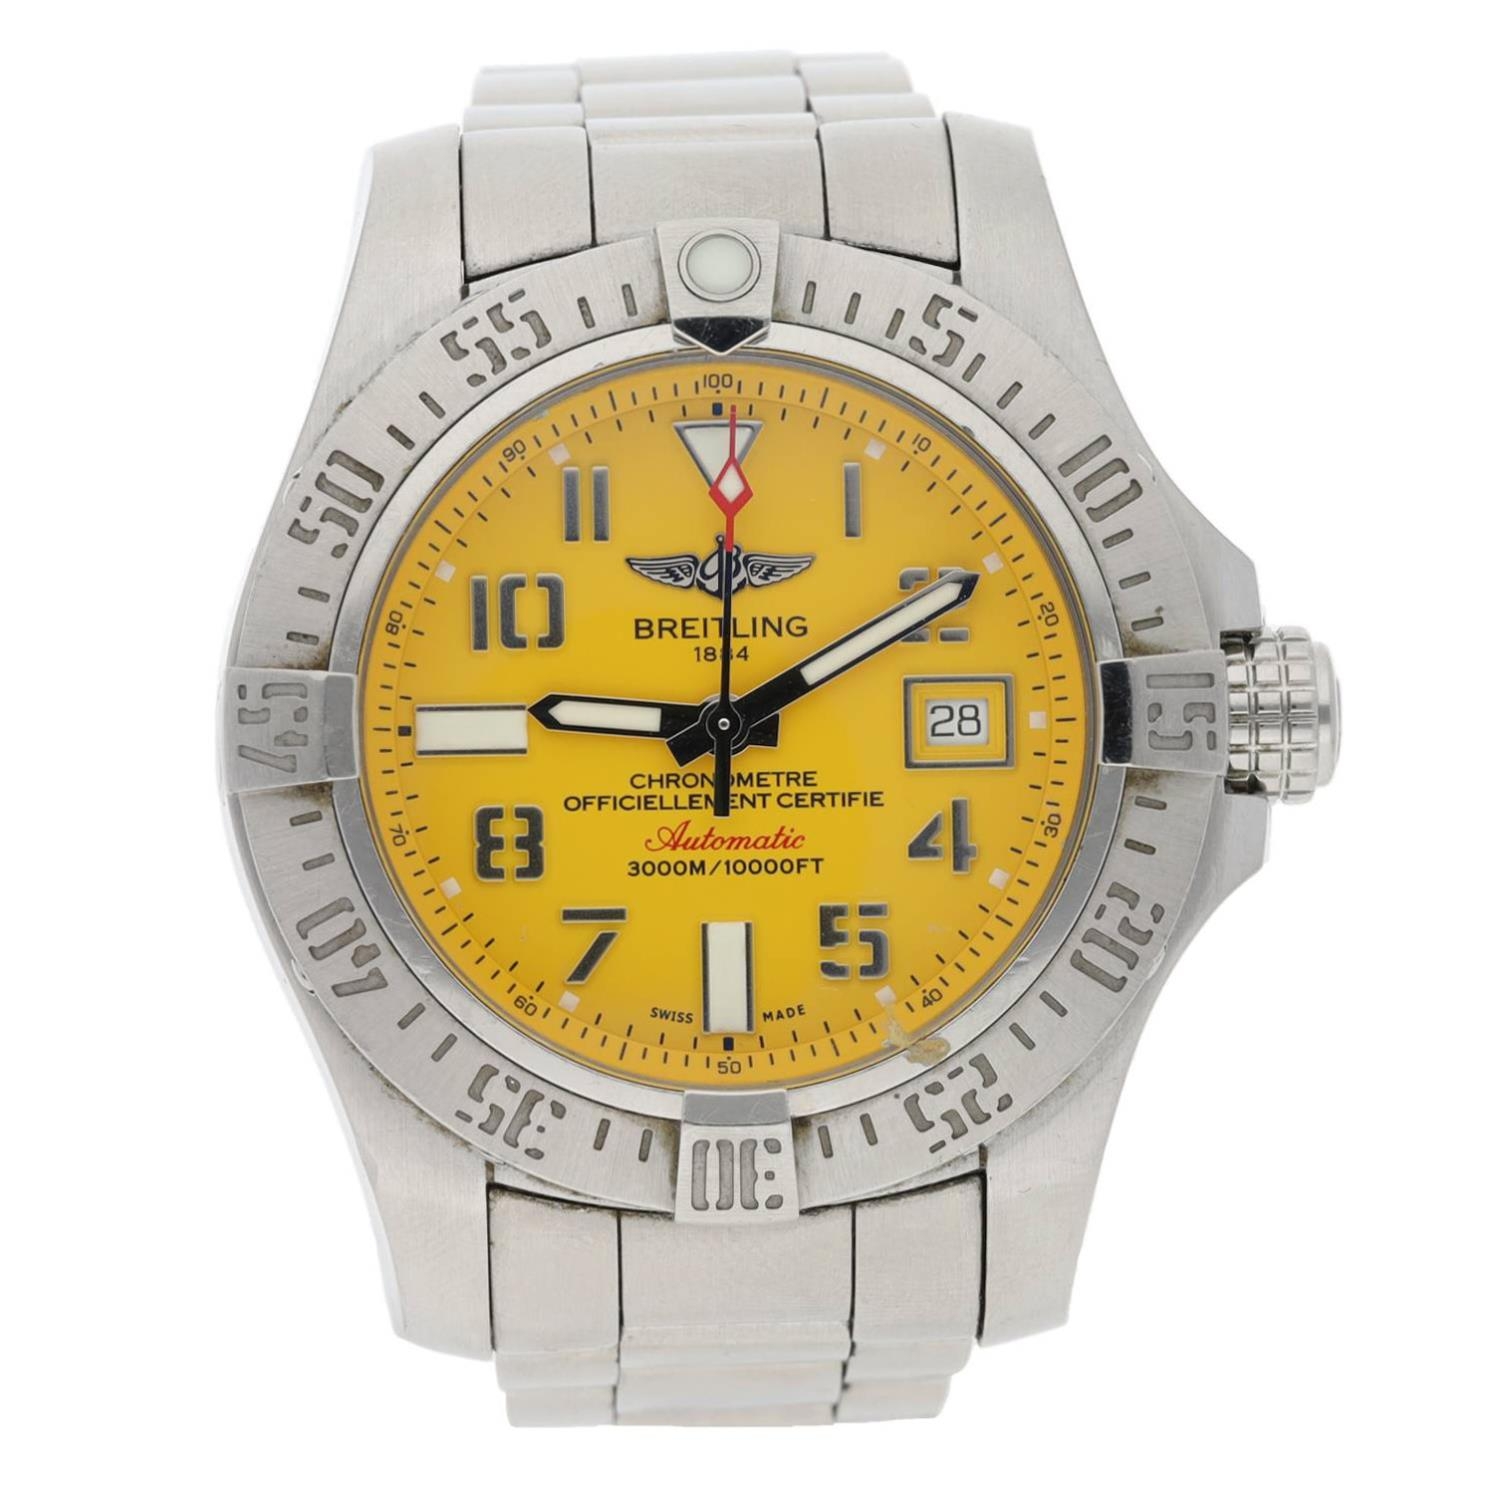 Breitling Avenger II Seawolf Chronometre automatic stainless steel gentleman's wristwatch, reference